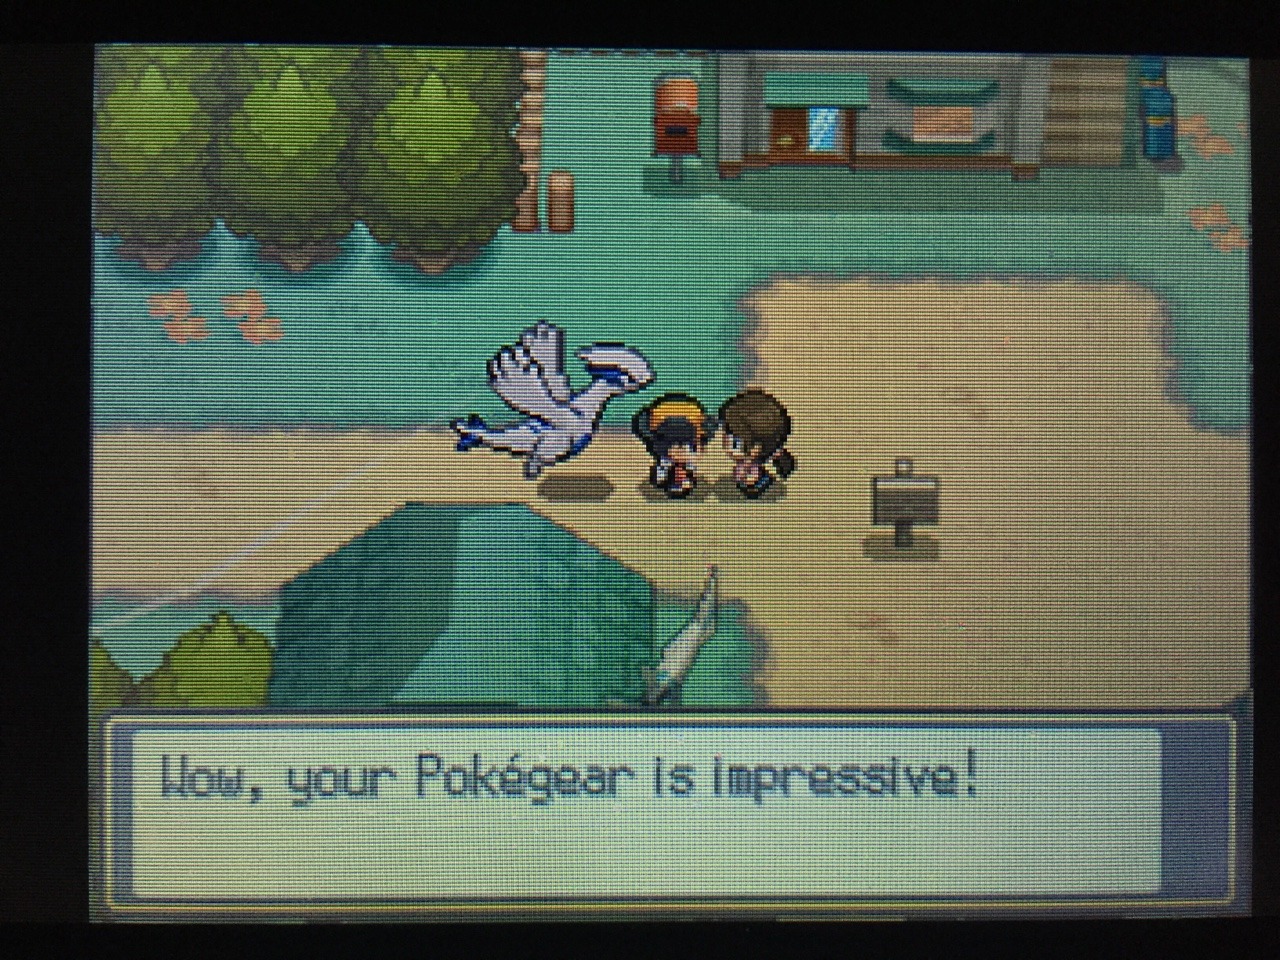 The player has Lugia as their walking pokemon in HGSS, but Gina seems more impressed by their Pokégear.